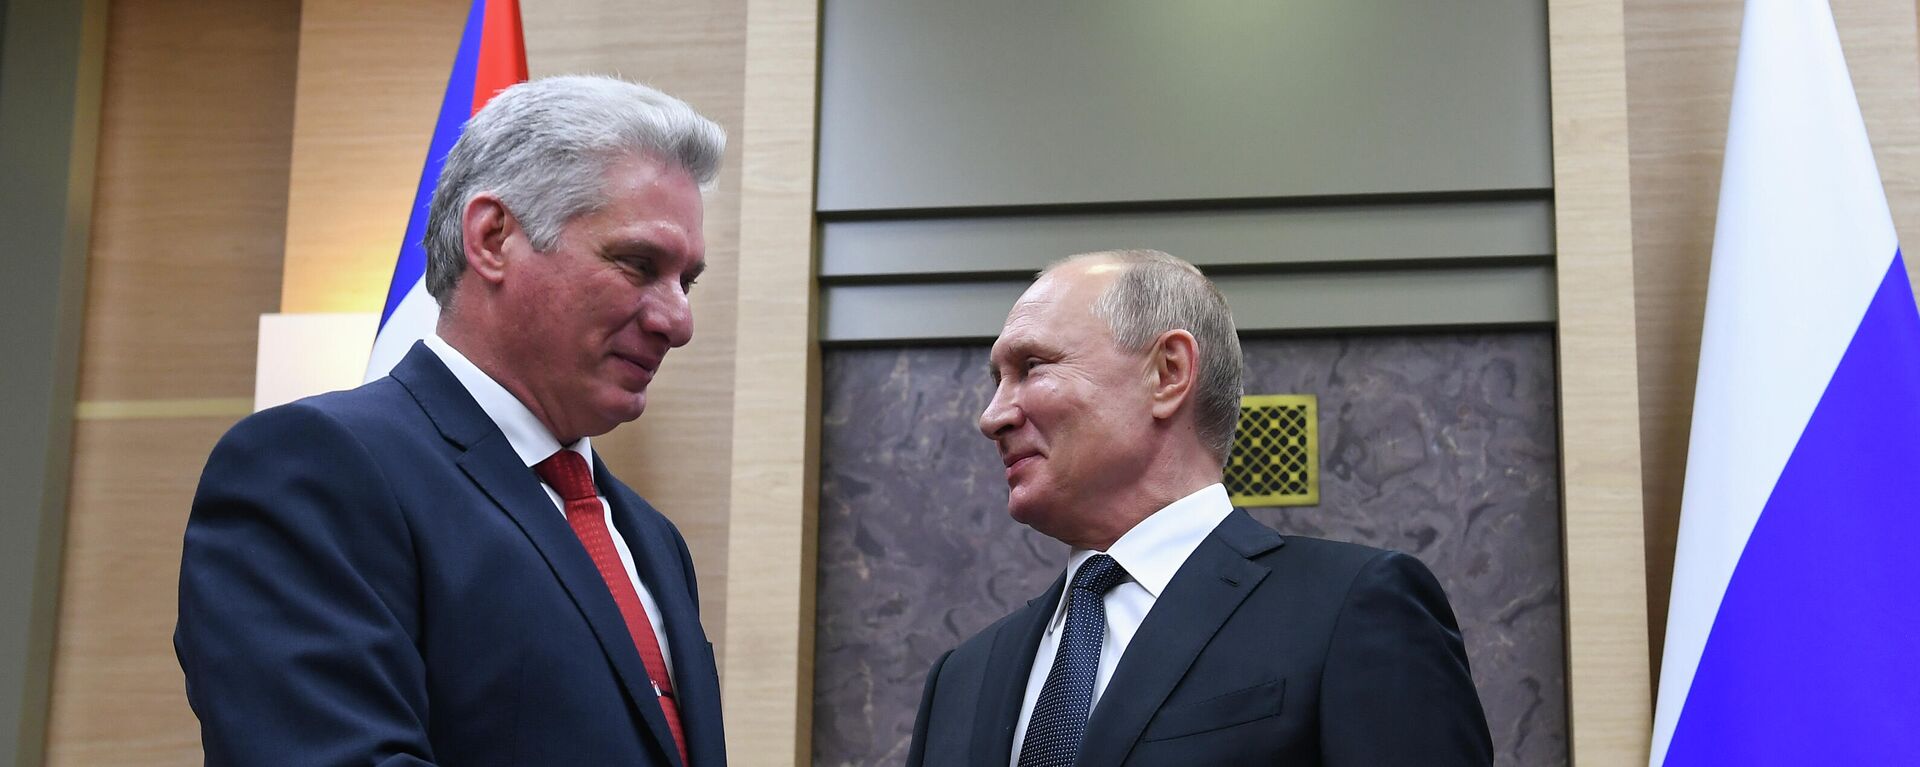 Russian President Vladimir Putin shakes hands with Cuban President Miguel Diaz-Canel during their meeting at Novo-Ogarevo residence, outside Moscow, Russia. - Sputnik International, 1920, 21.05.2023